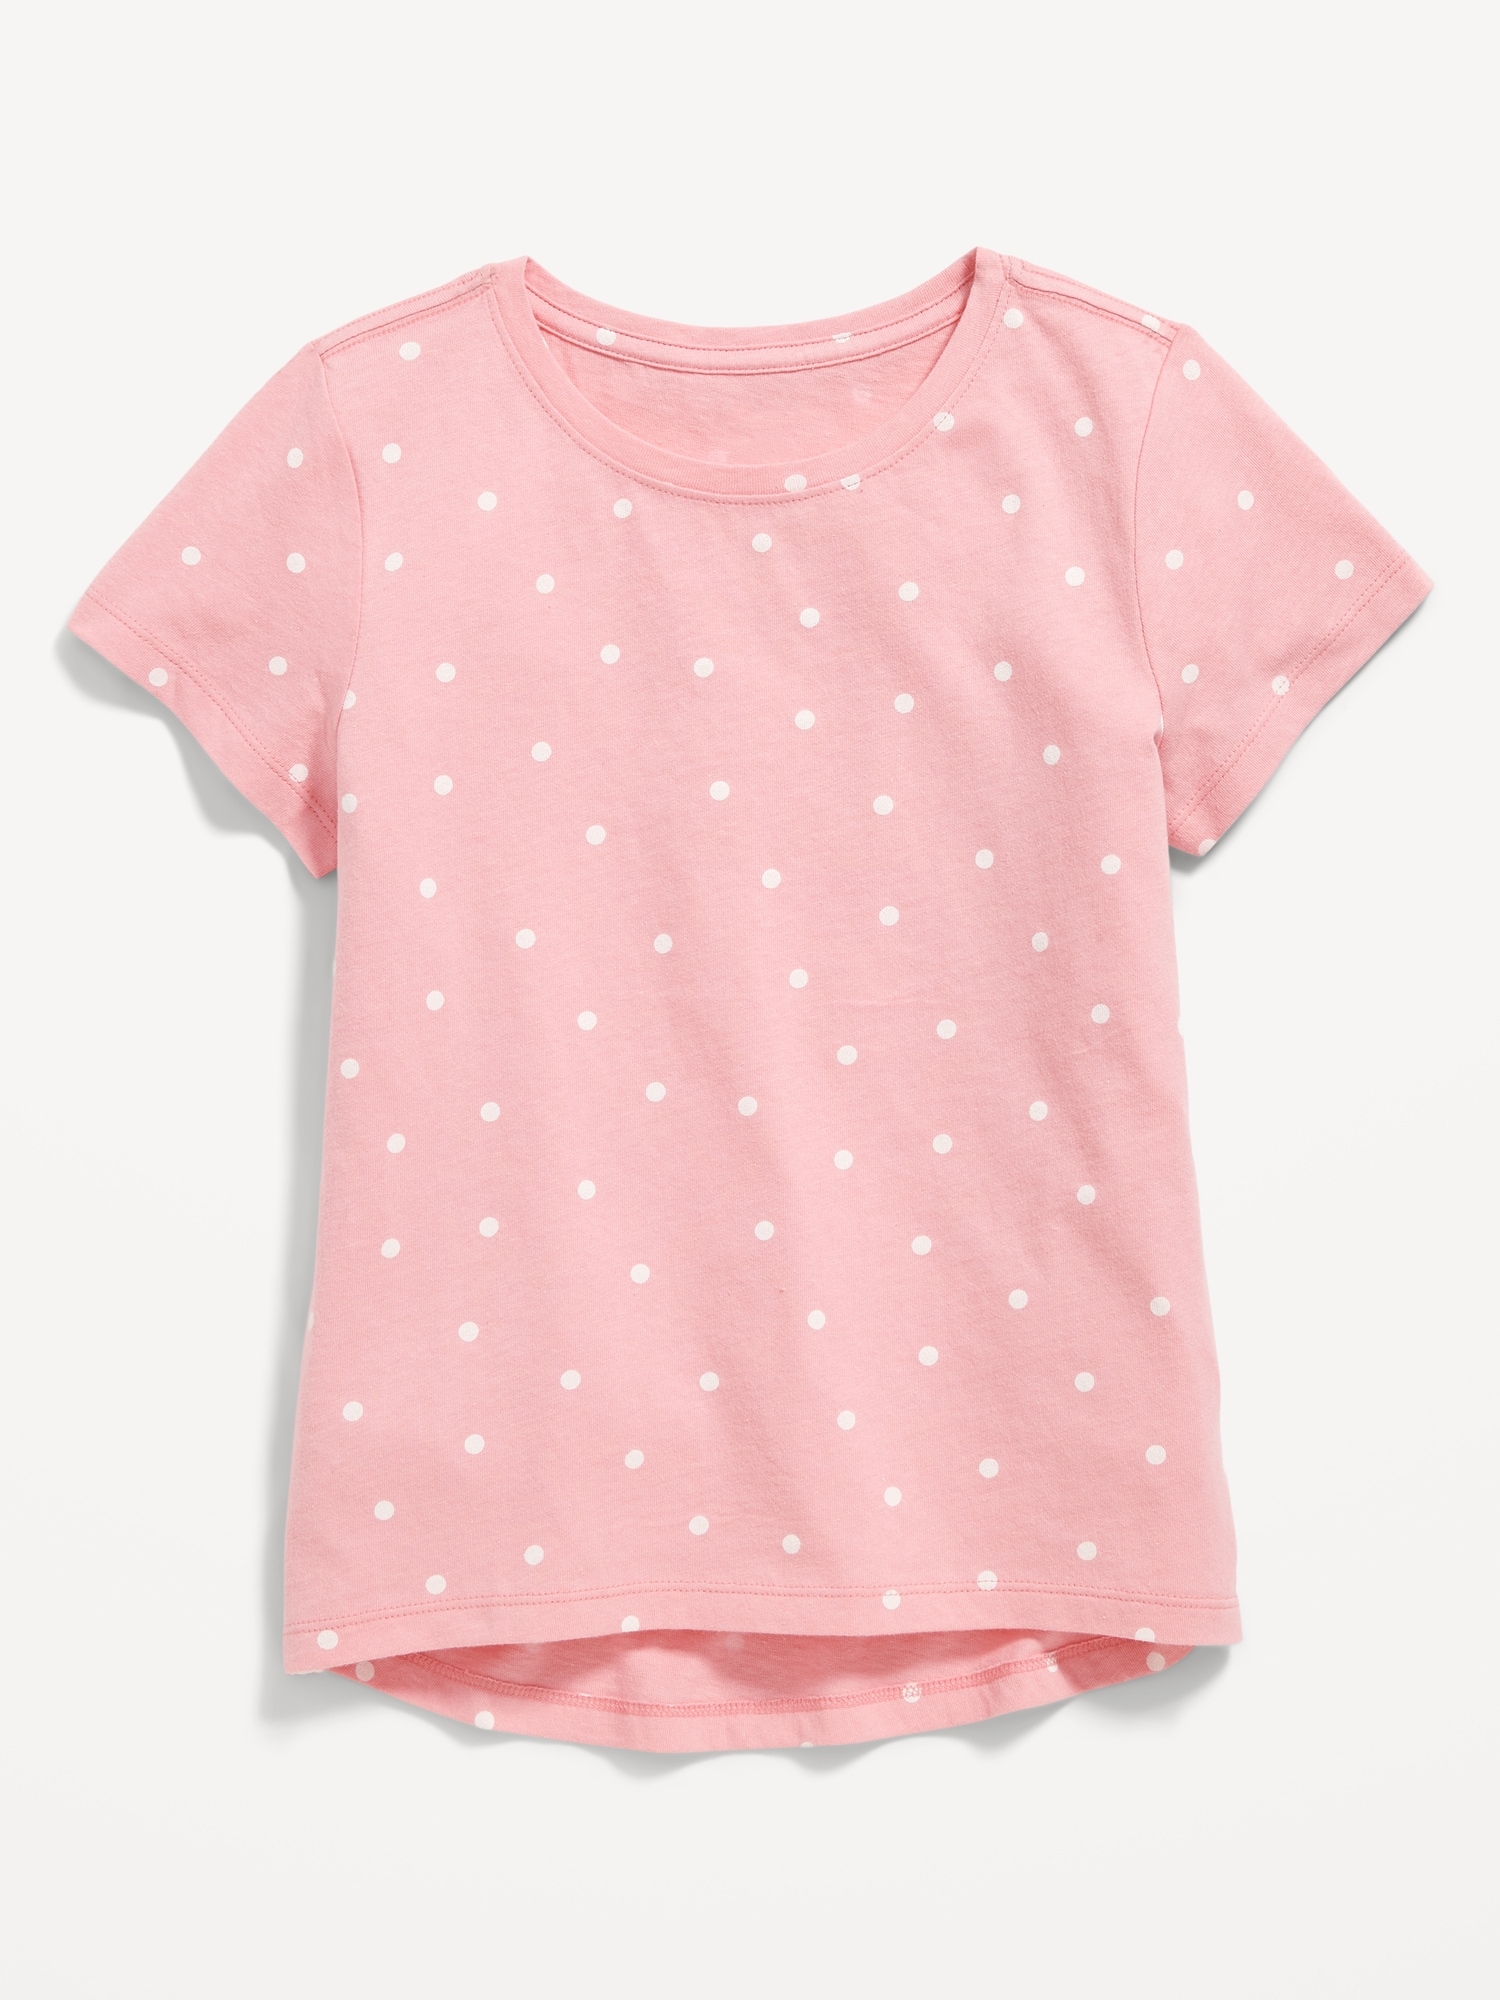 Old Navy Softest Printed T-Shirt for Girls pink. 1